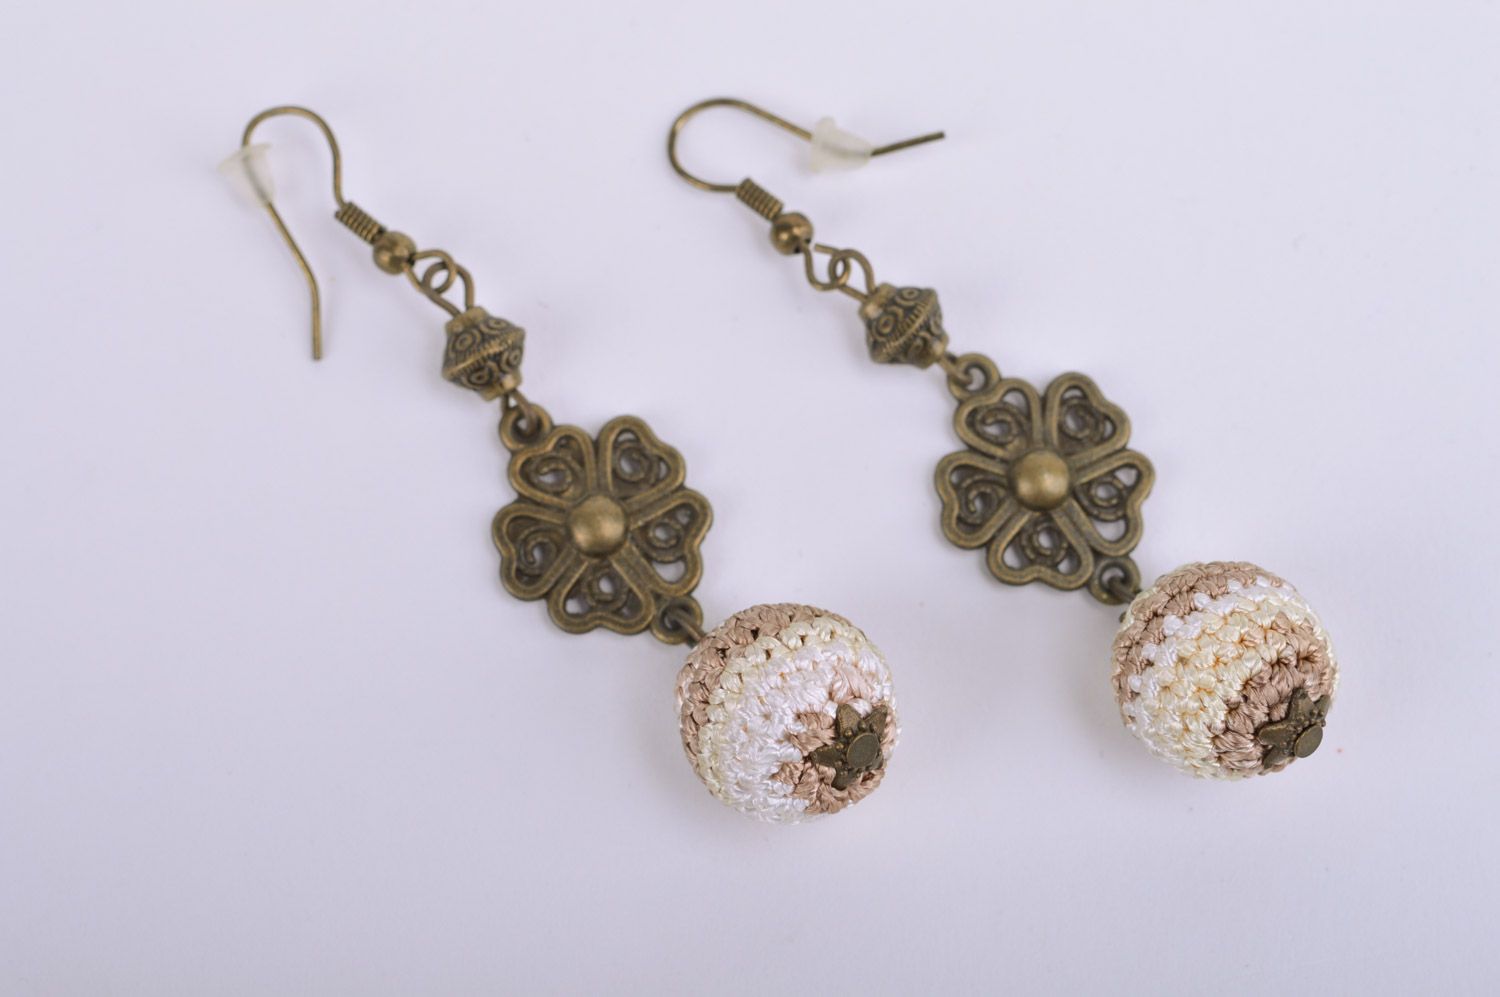 Handmade dangle earrings with metal fittings and light crocheted over beads photo 2